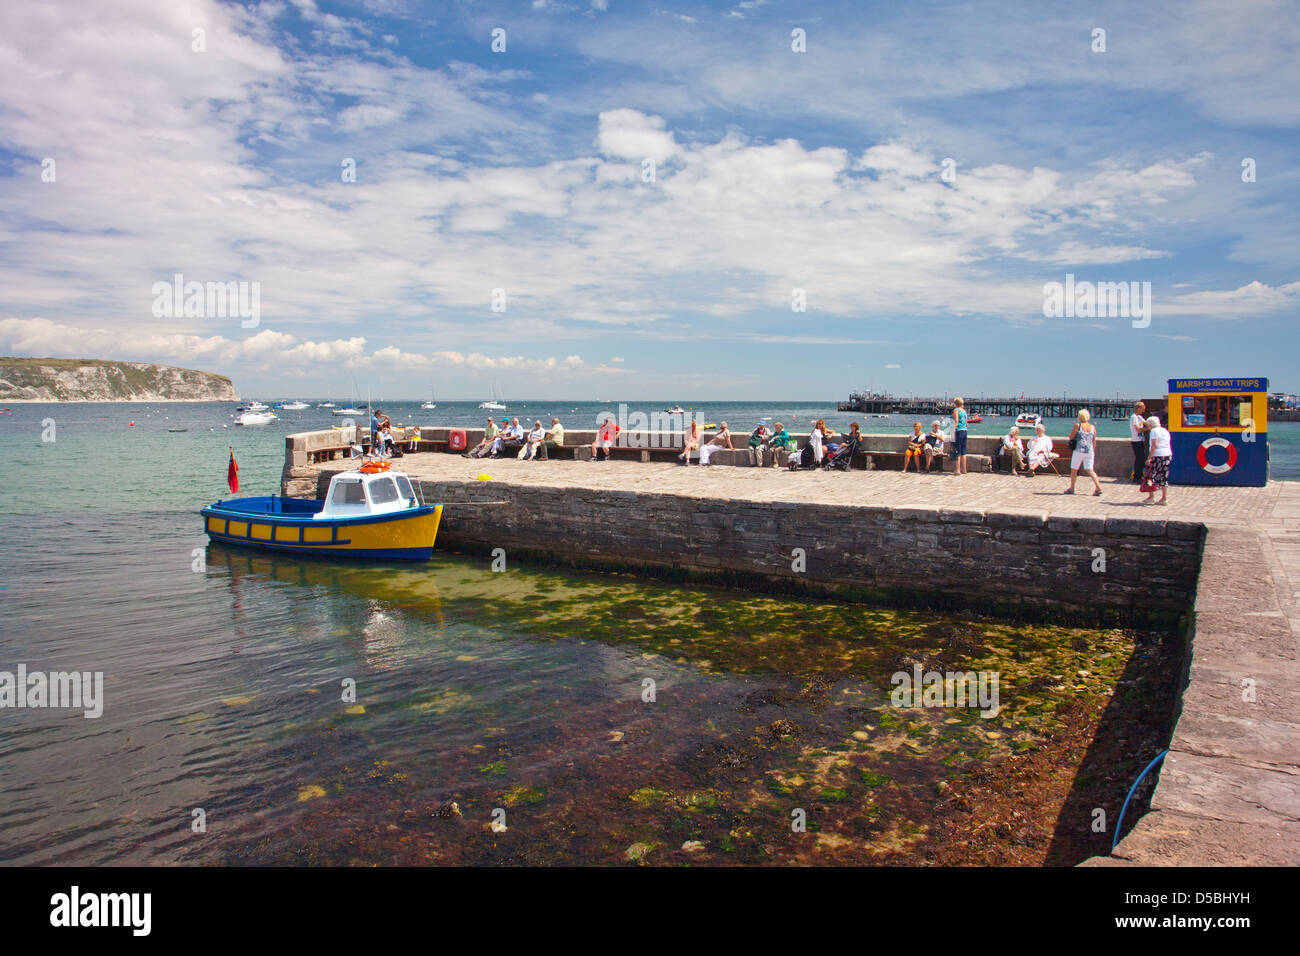 A tourist boat moored at a stone quay in Swanage in Dorset England UK Stock Photo